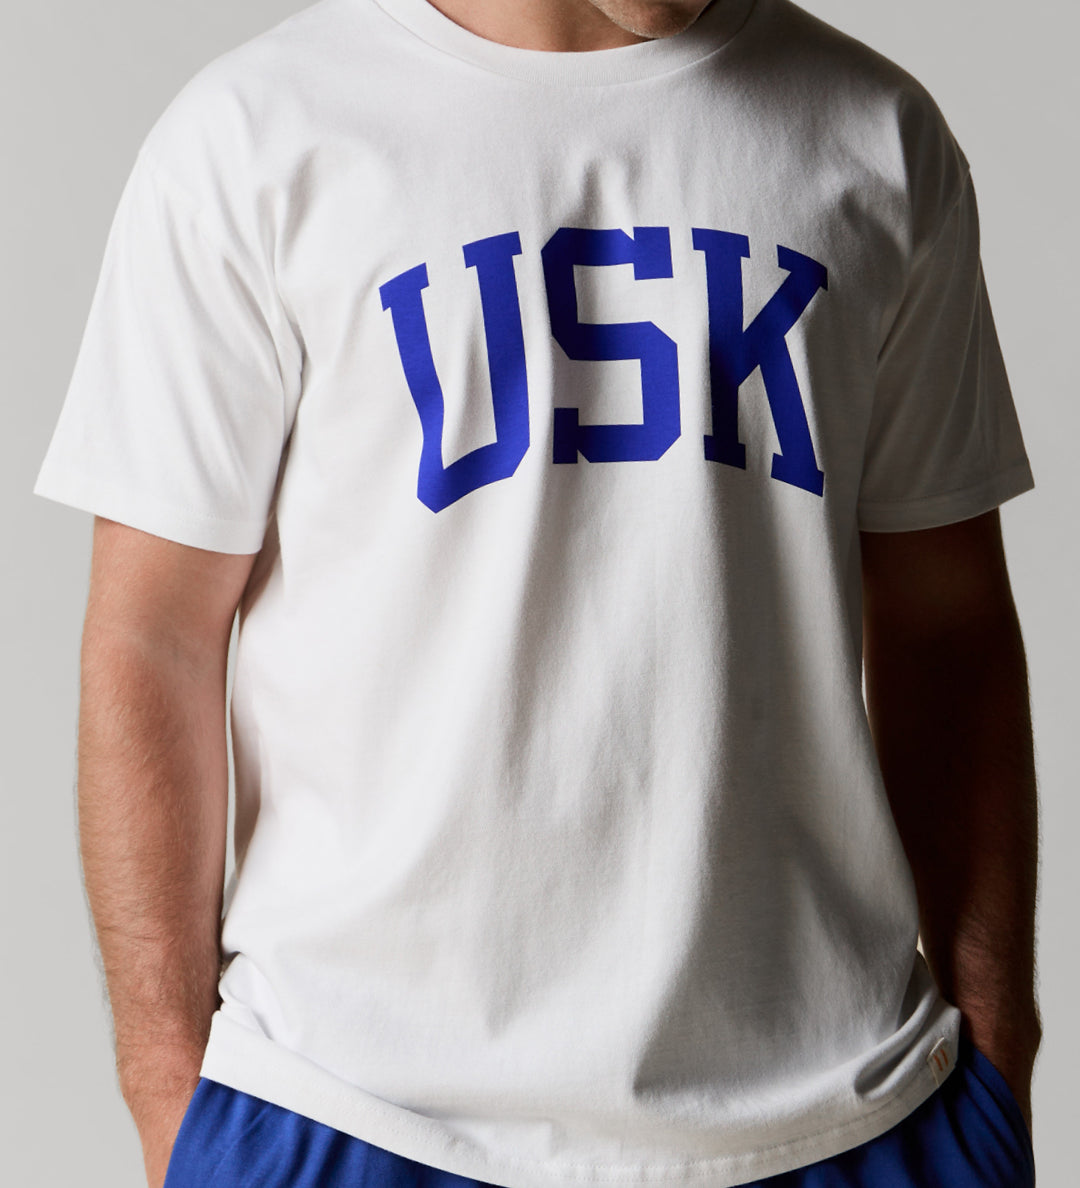 Model shot showing front of Uskees men's white short sleeve t-shirt with the signature USK logo on the front in blue.